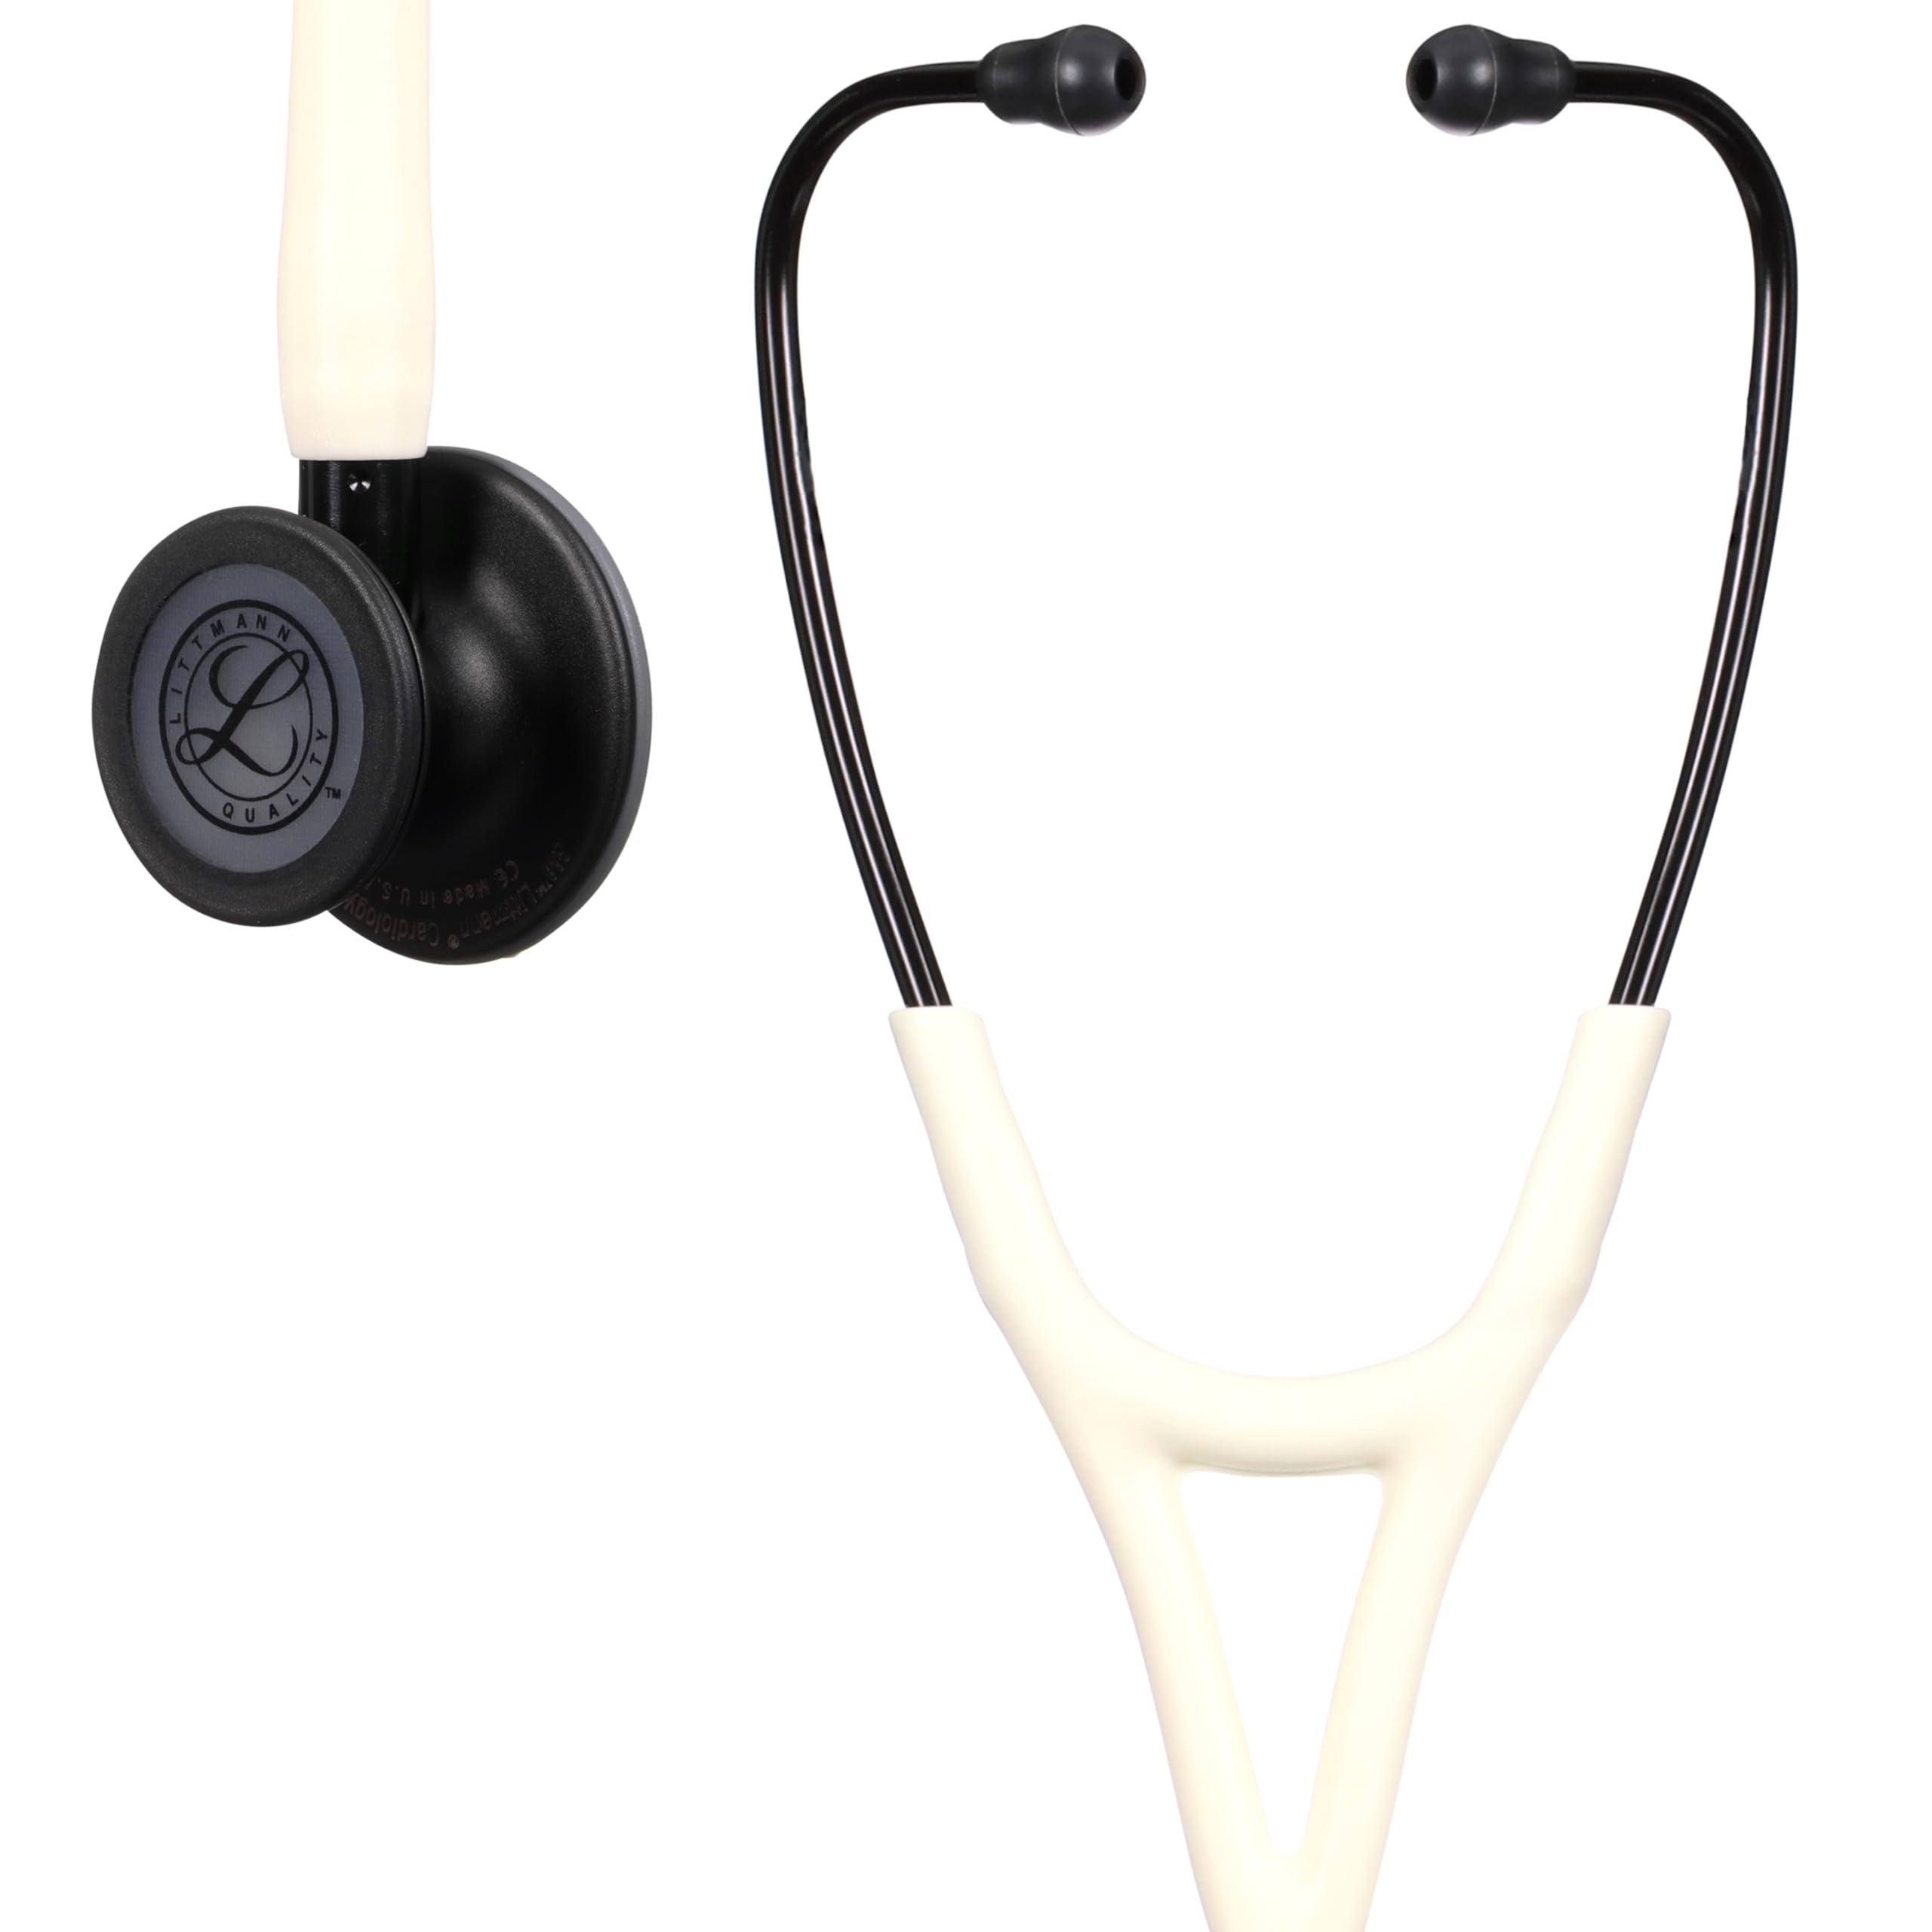 3M™ Littmann® Cardiology IV™ Diagnostic Stethoscope, 6186C, Black Matte-finish Chestpiece with Alabaster Satin-Finish Tube for Added Comfort, Flexibility and Cleanability